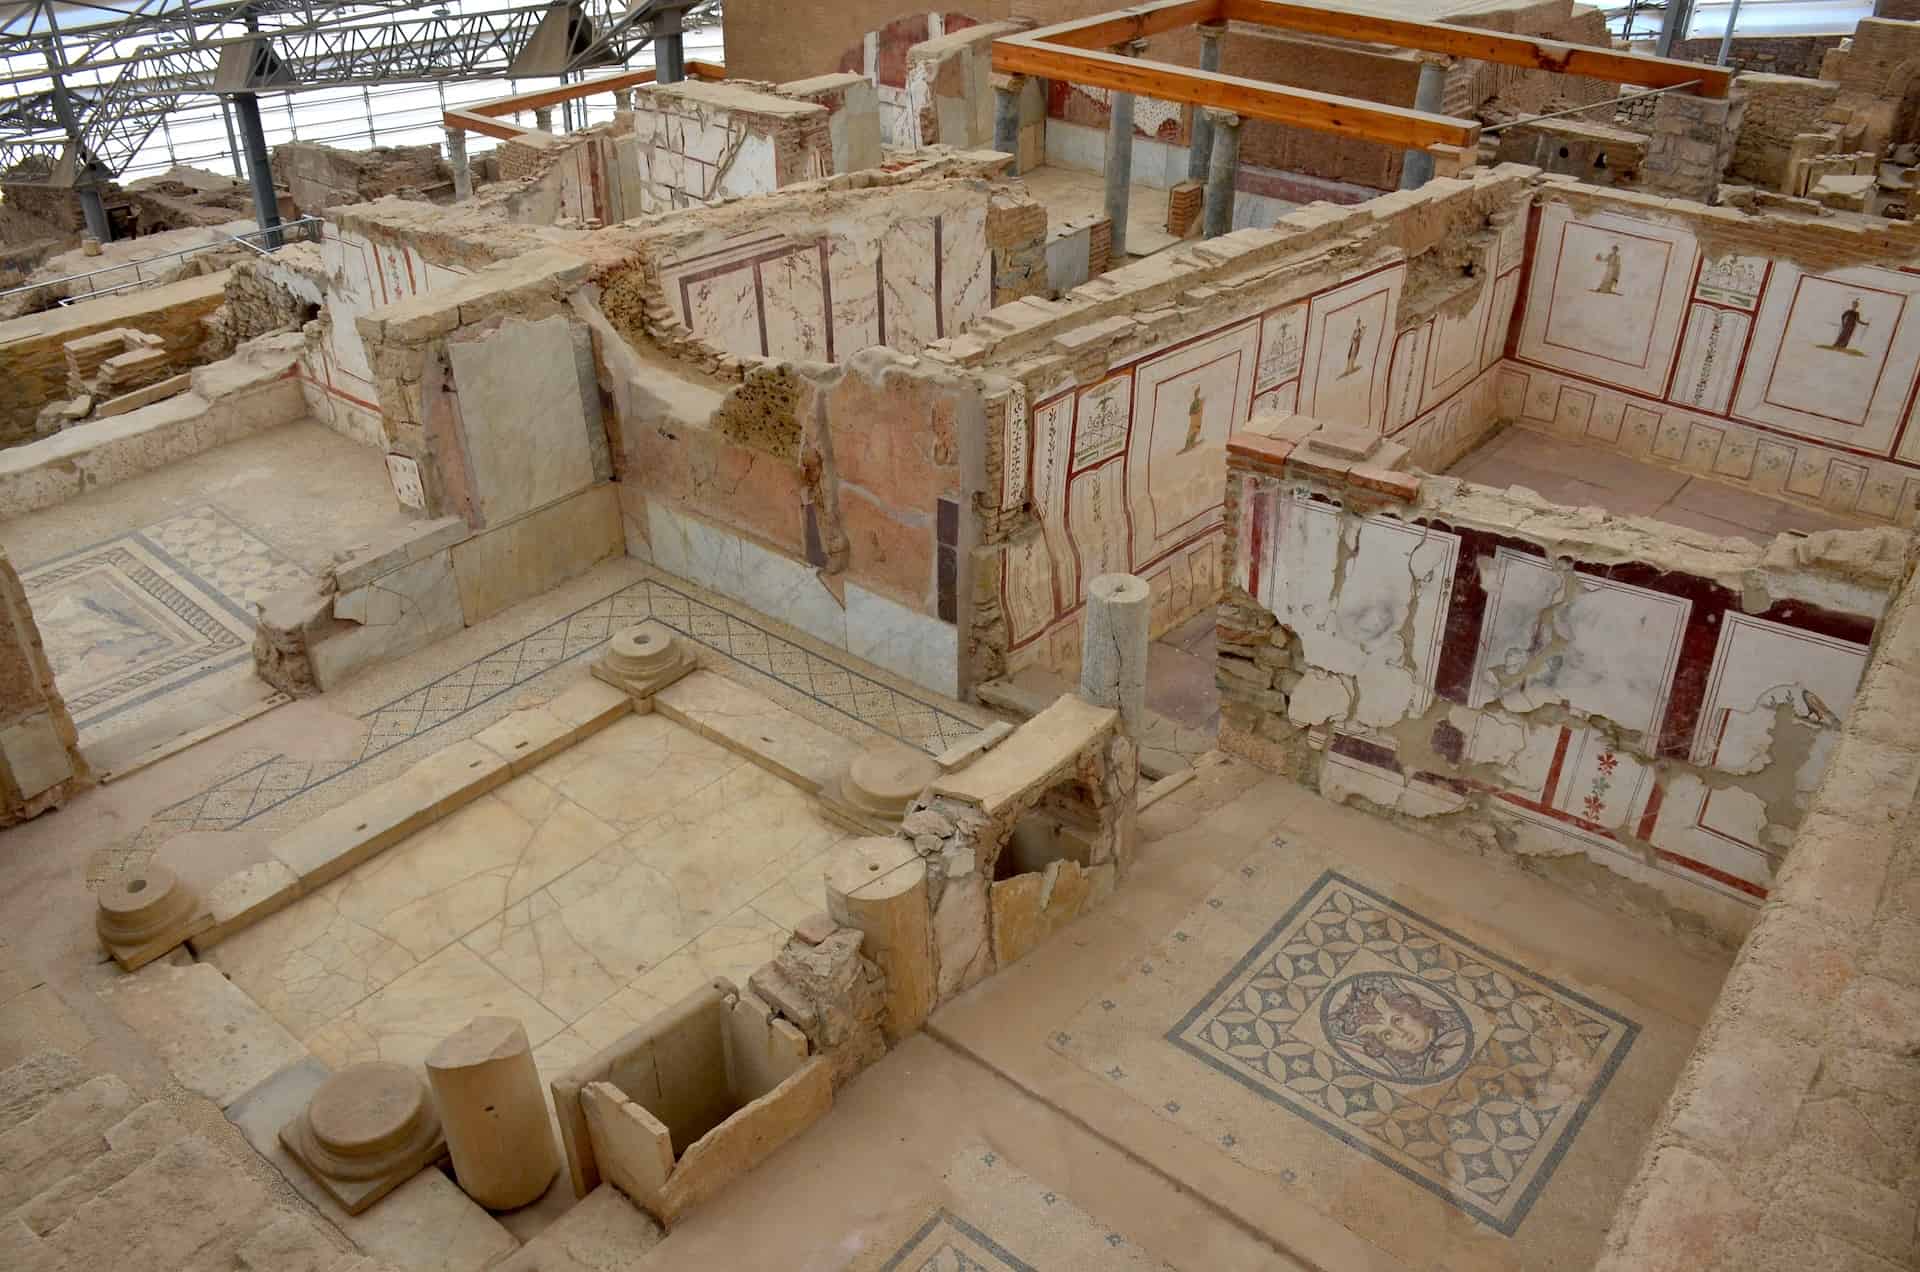 Dwelling Unit 3 in the Terrace Houses at Ephesus